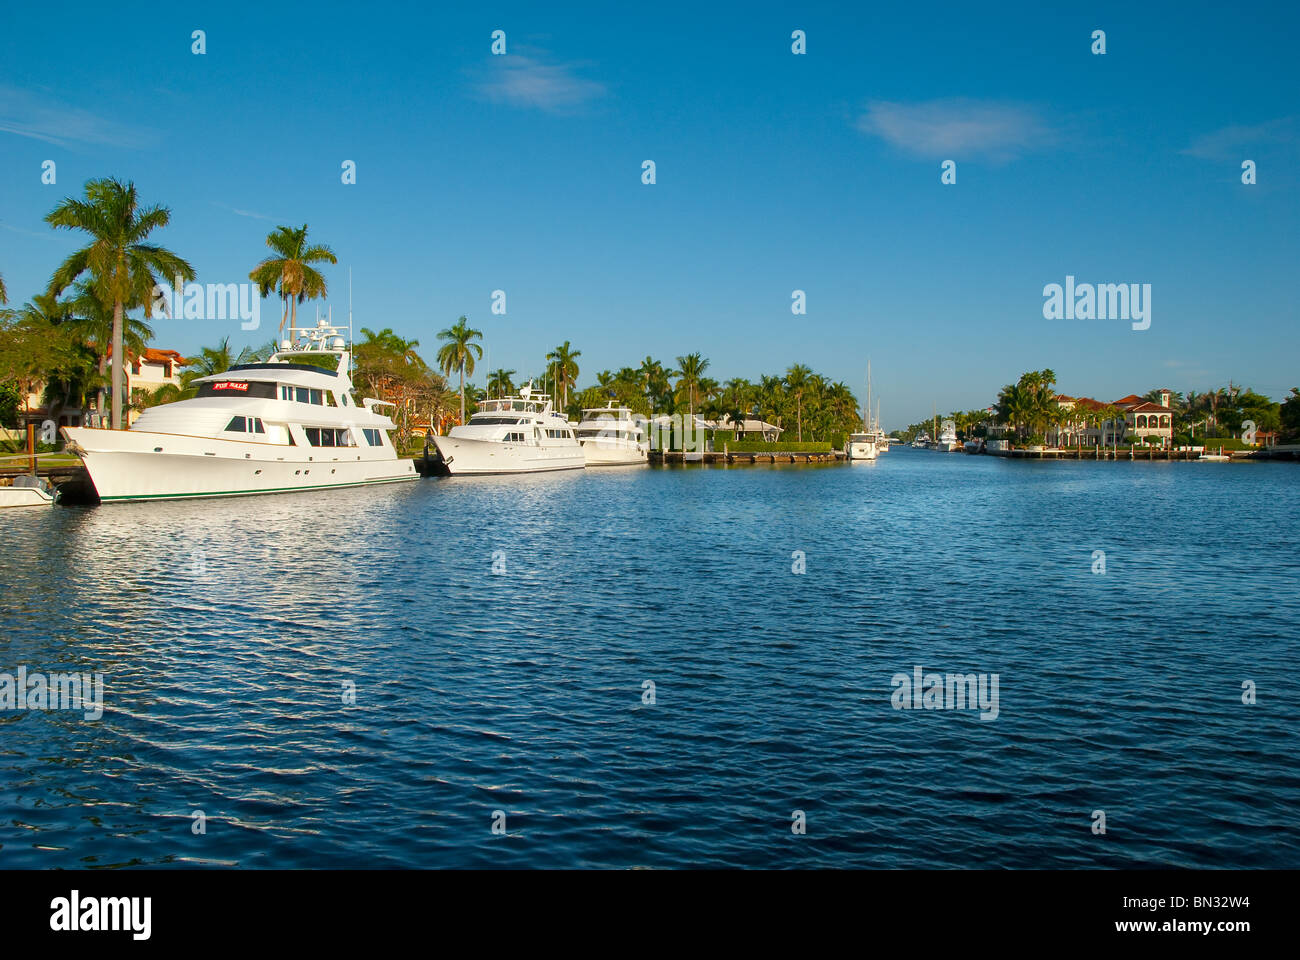 Private yachts docked at luxury waterfront homes in Fort Lauderdale, Florida Stock Photo